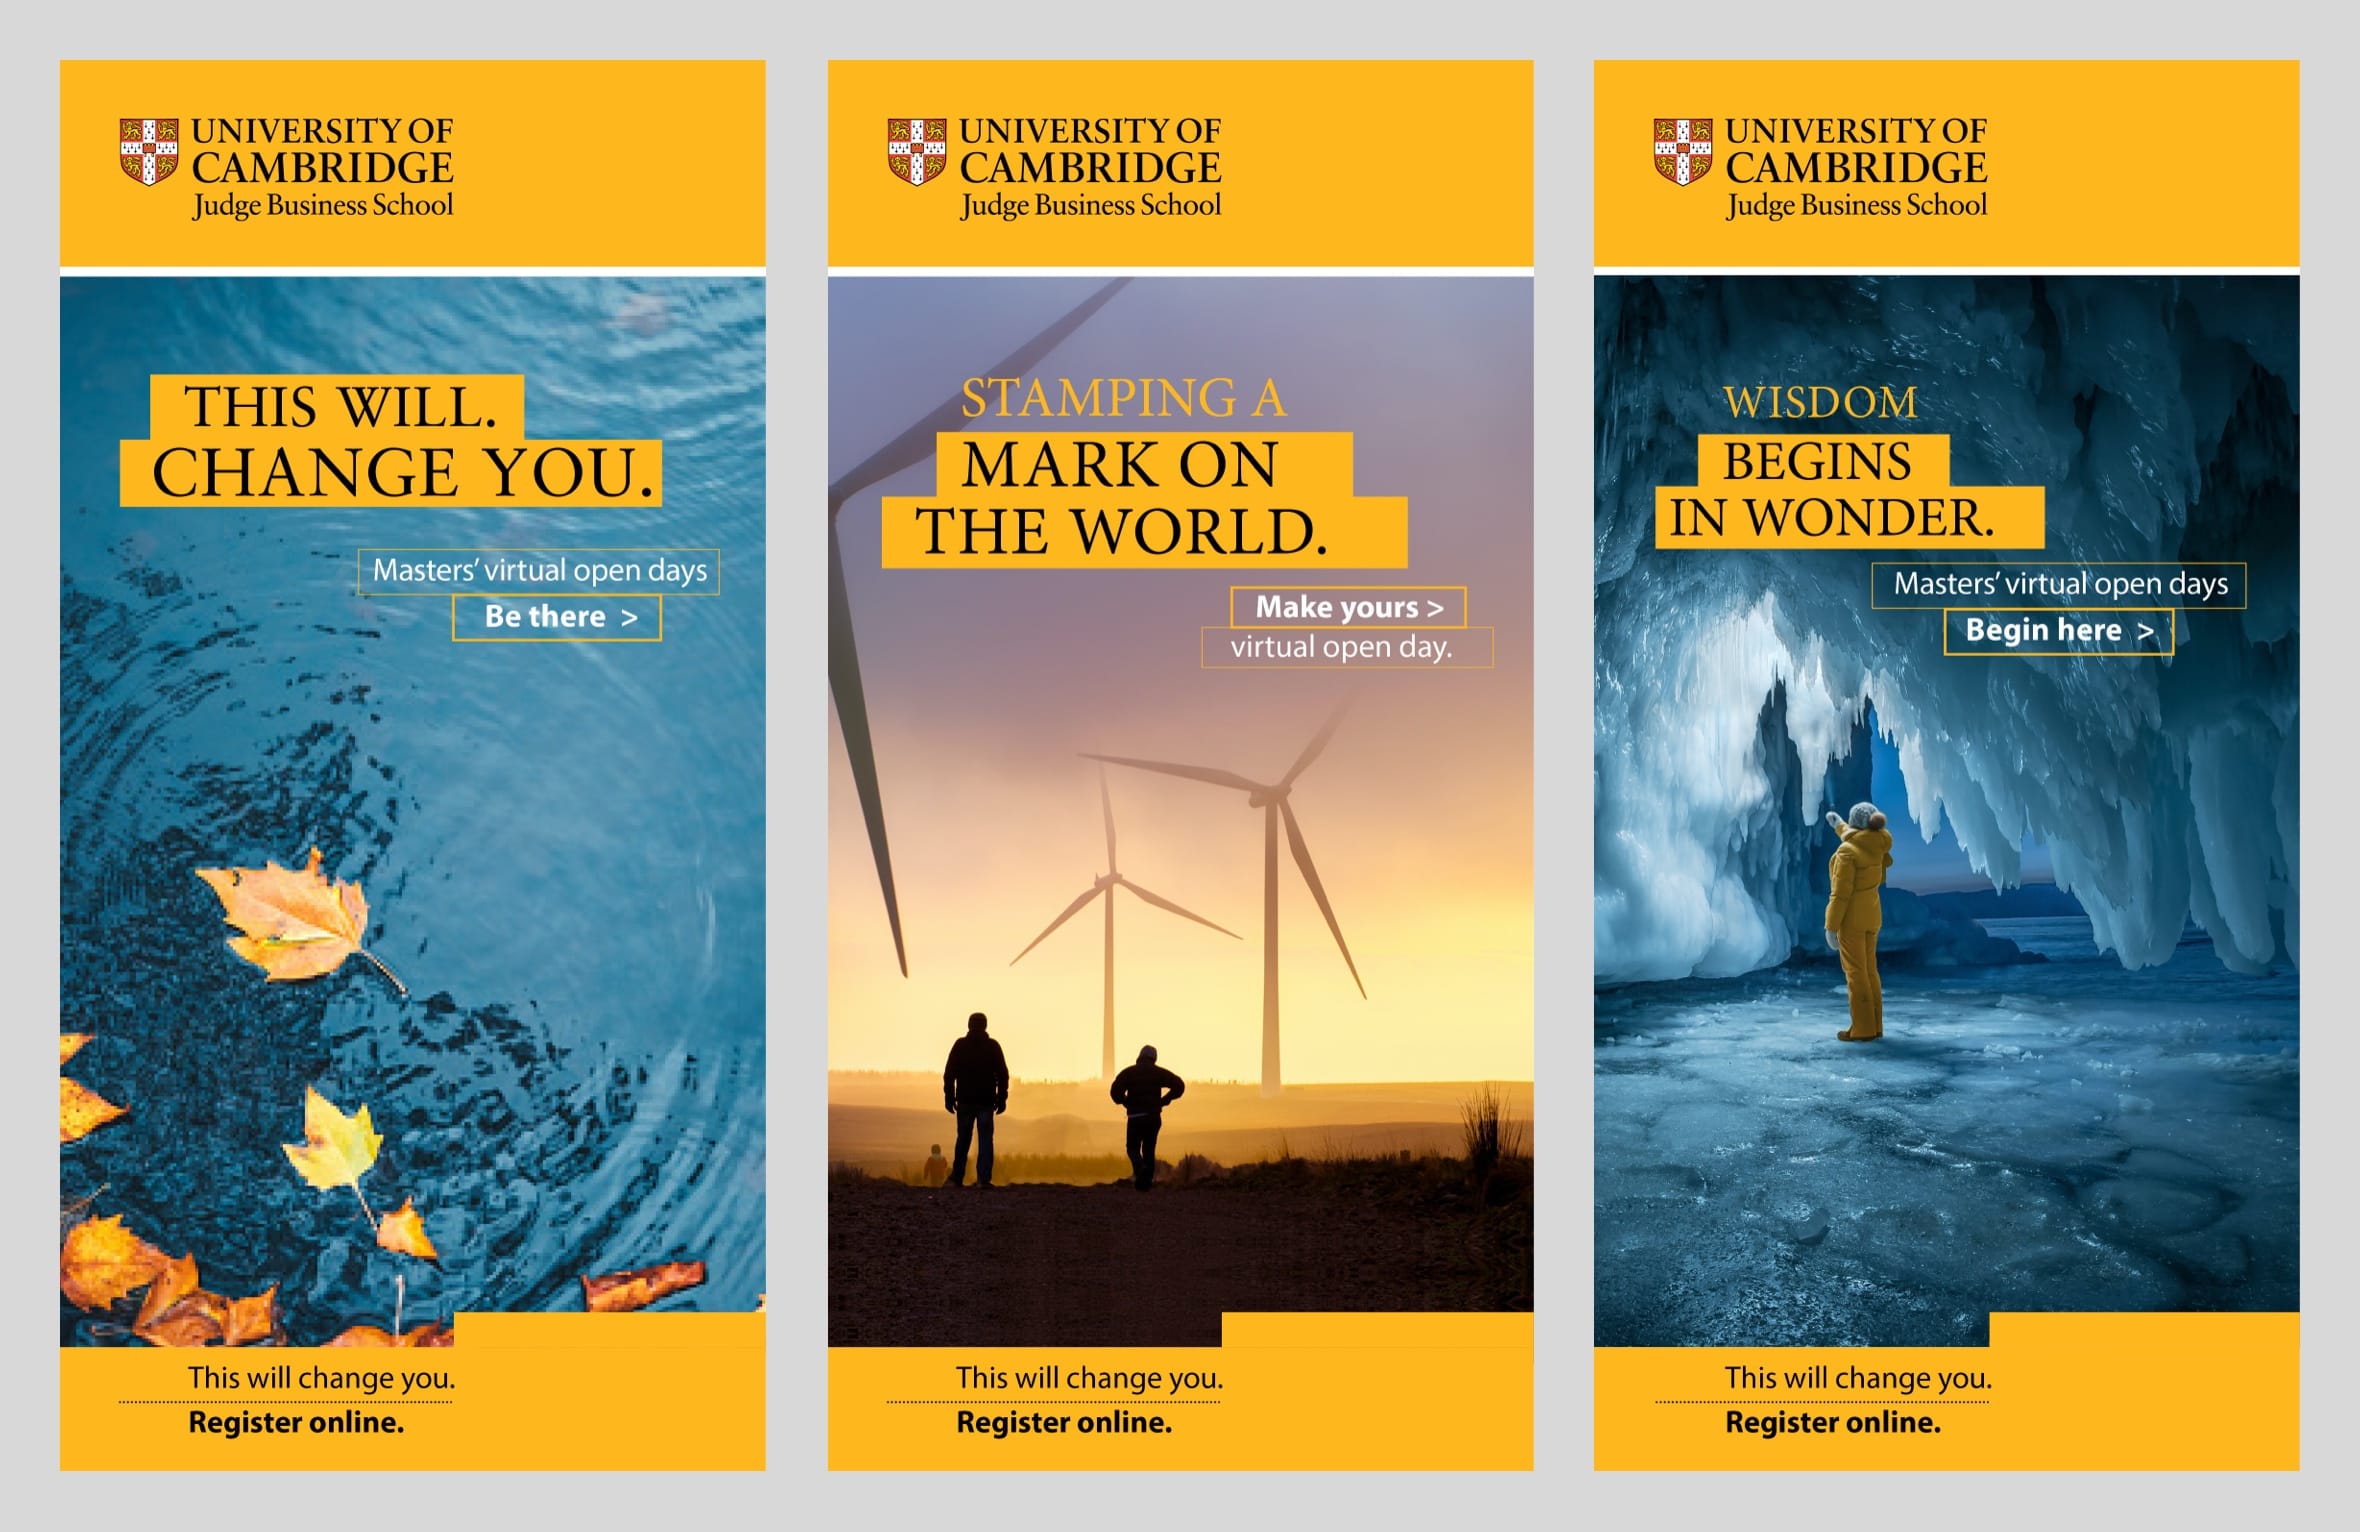 Three adverts for Cambridge Judge Business School: Leaves on water 'This will change you', Wind turbines 'Stamping a mark on the world', Person in ice cave 'Wisdom begins in wonder'